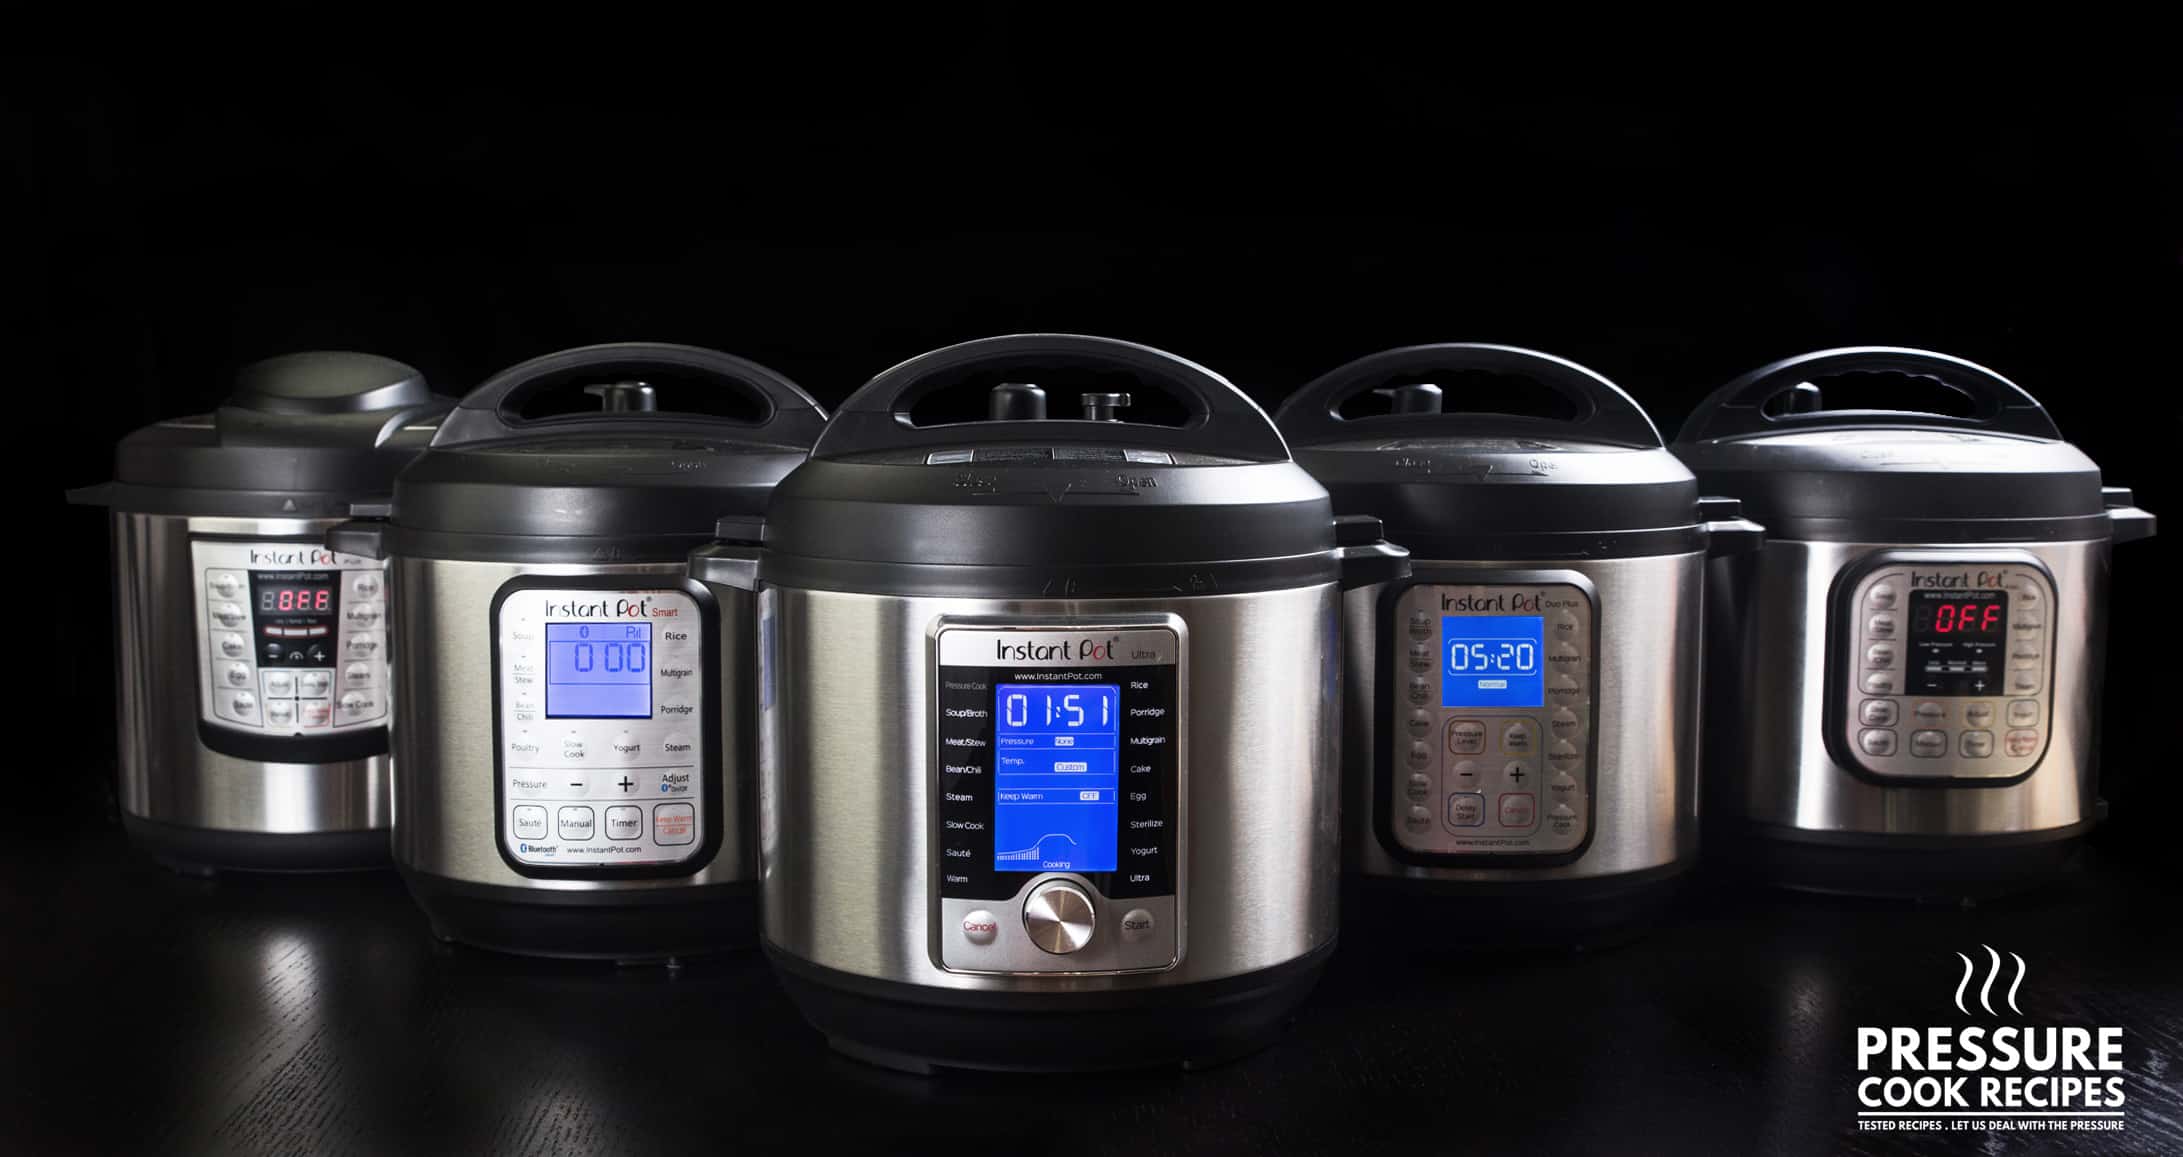 Instant Pot Review: Which Instant Pot to Buy. First-hand user experience of all Instant Pot Electric Pressure Cookers. Thoughts on what size, model, features, price is best Instant Pot to buy.